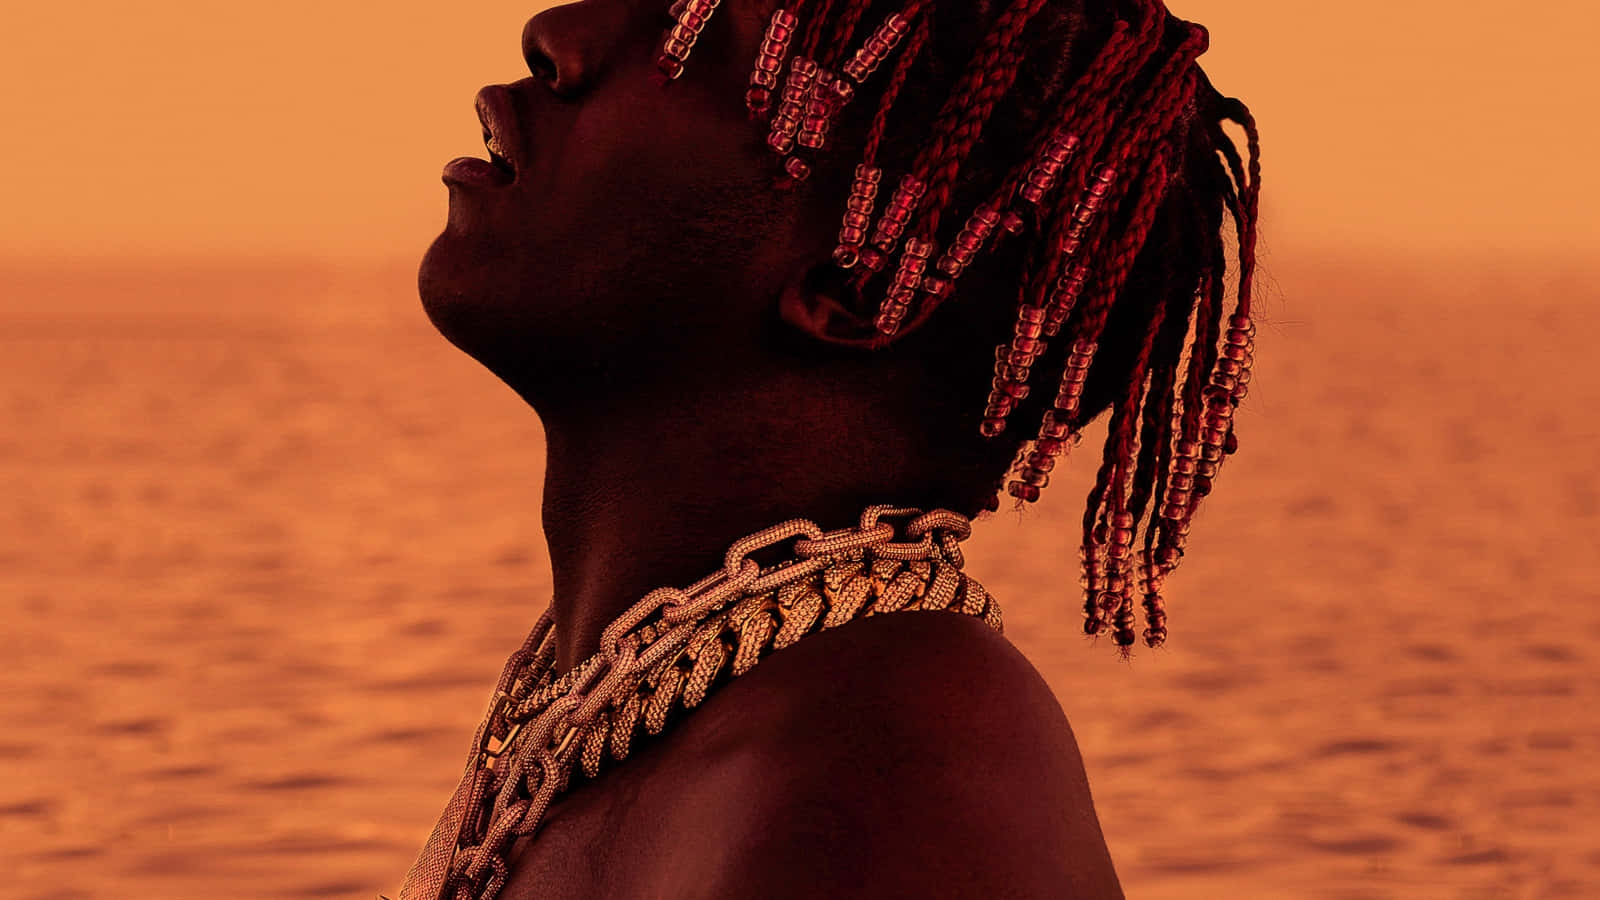 Lil Yachty Enjoys Success and Fame Wallpaper